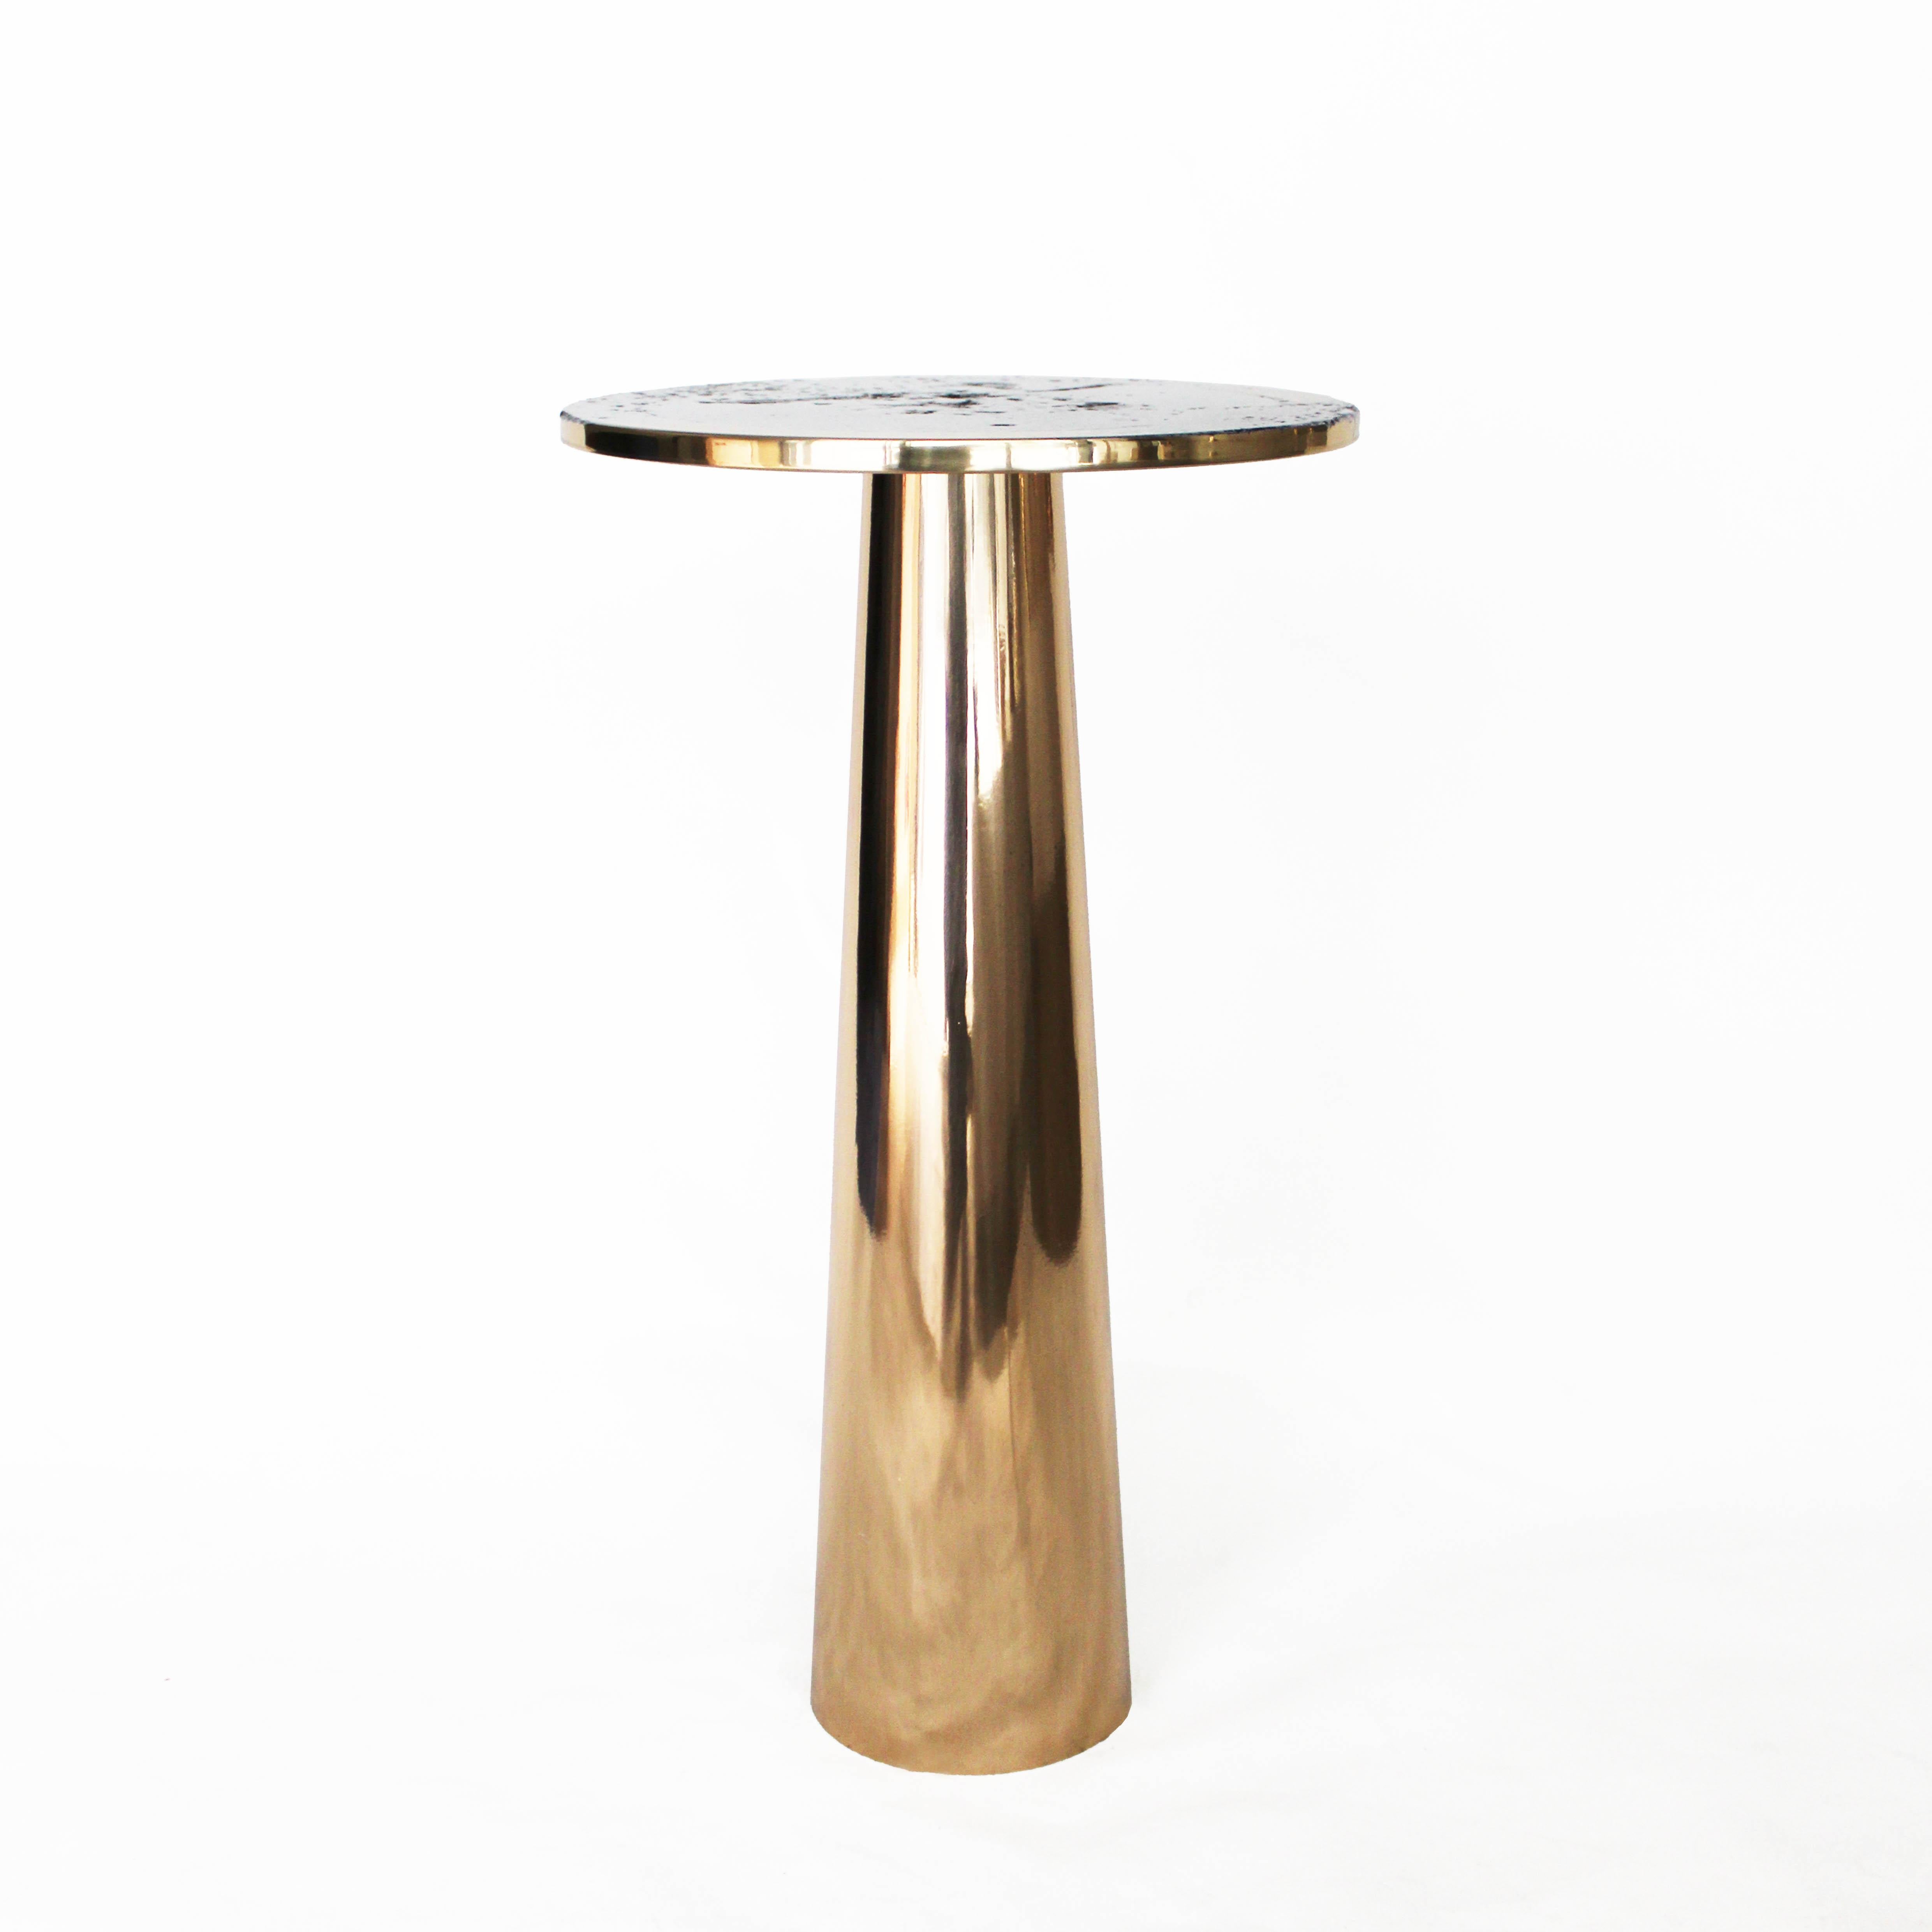 The Cone Table is inspired by the interconnections between the elements and life forms. 
The conical shape of the base, the asymmetrical form of the top, and the rounded edges provide the table with a silky appearance.

Cone Table, made of bronze or